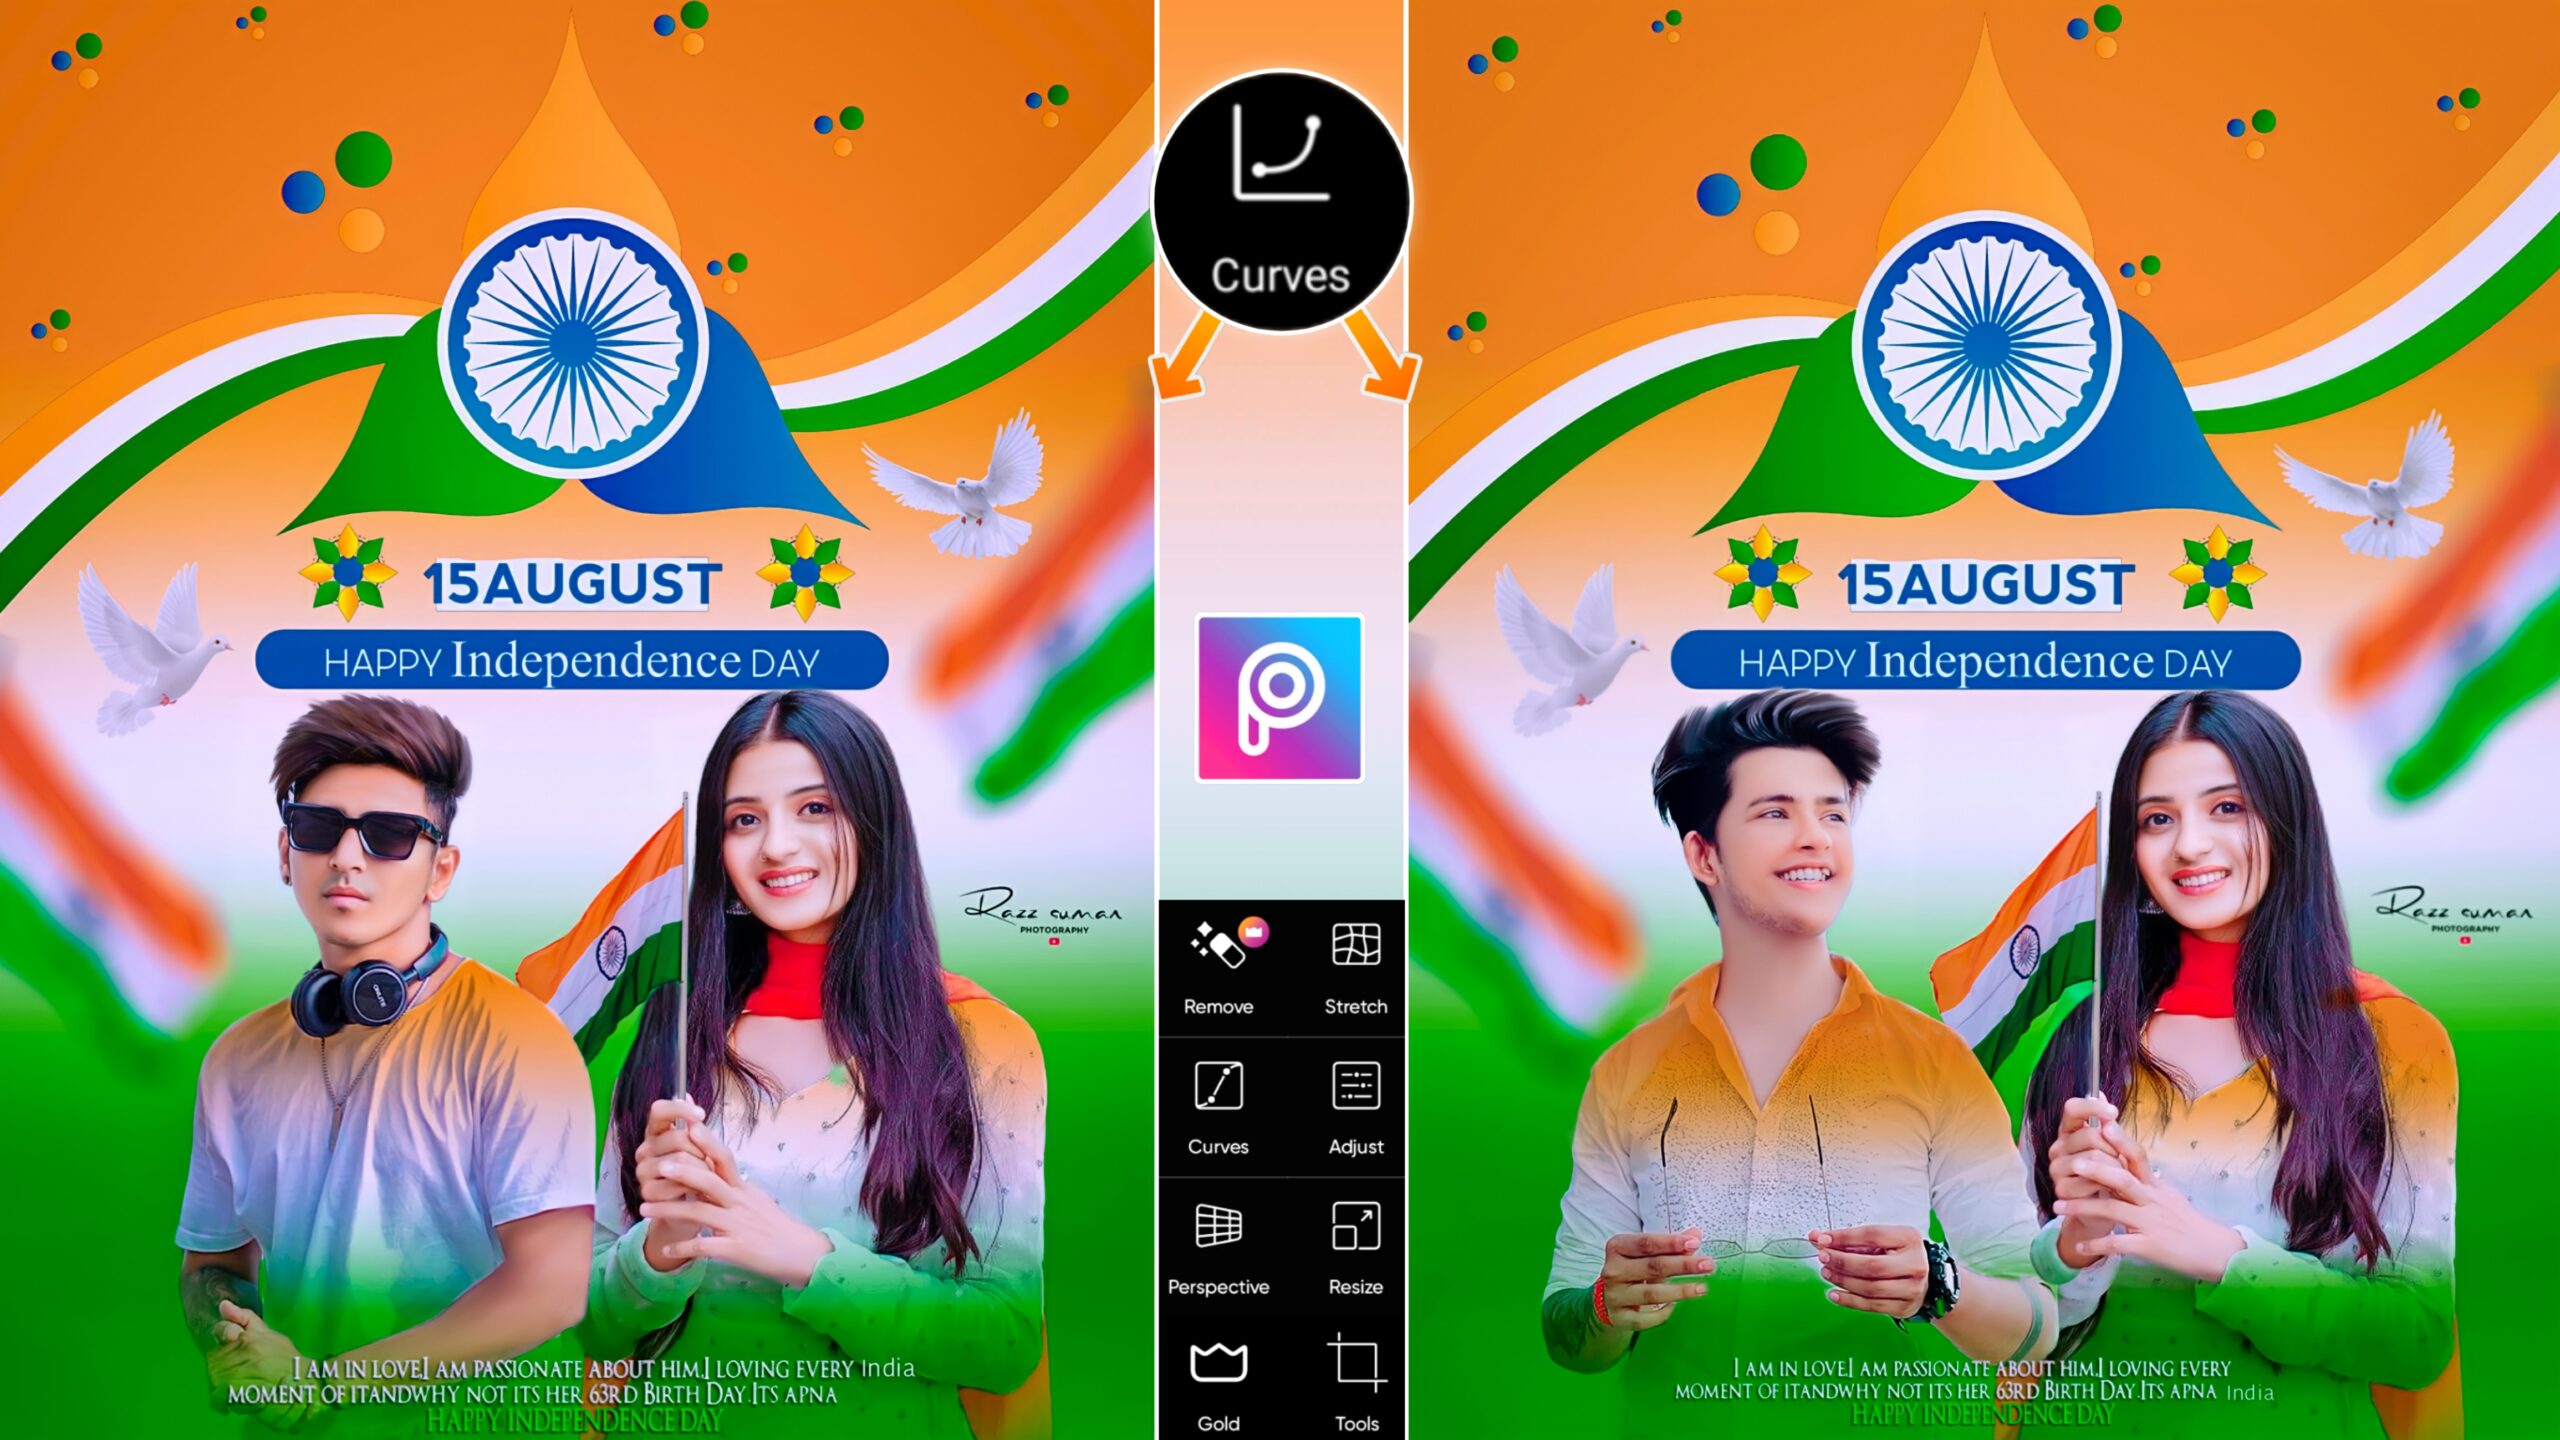 15 August Photo Shoot & Pose 📸🇮🇳 | Independence day Photo Shoot - YouTube